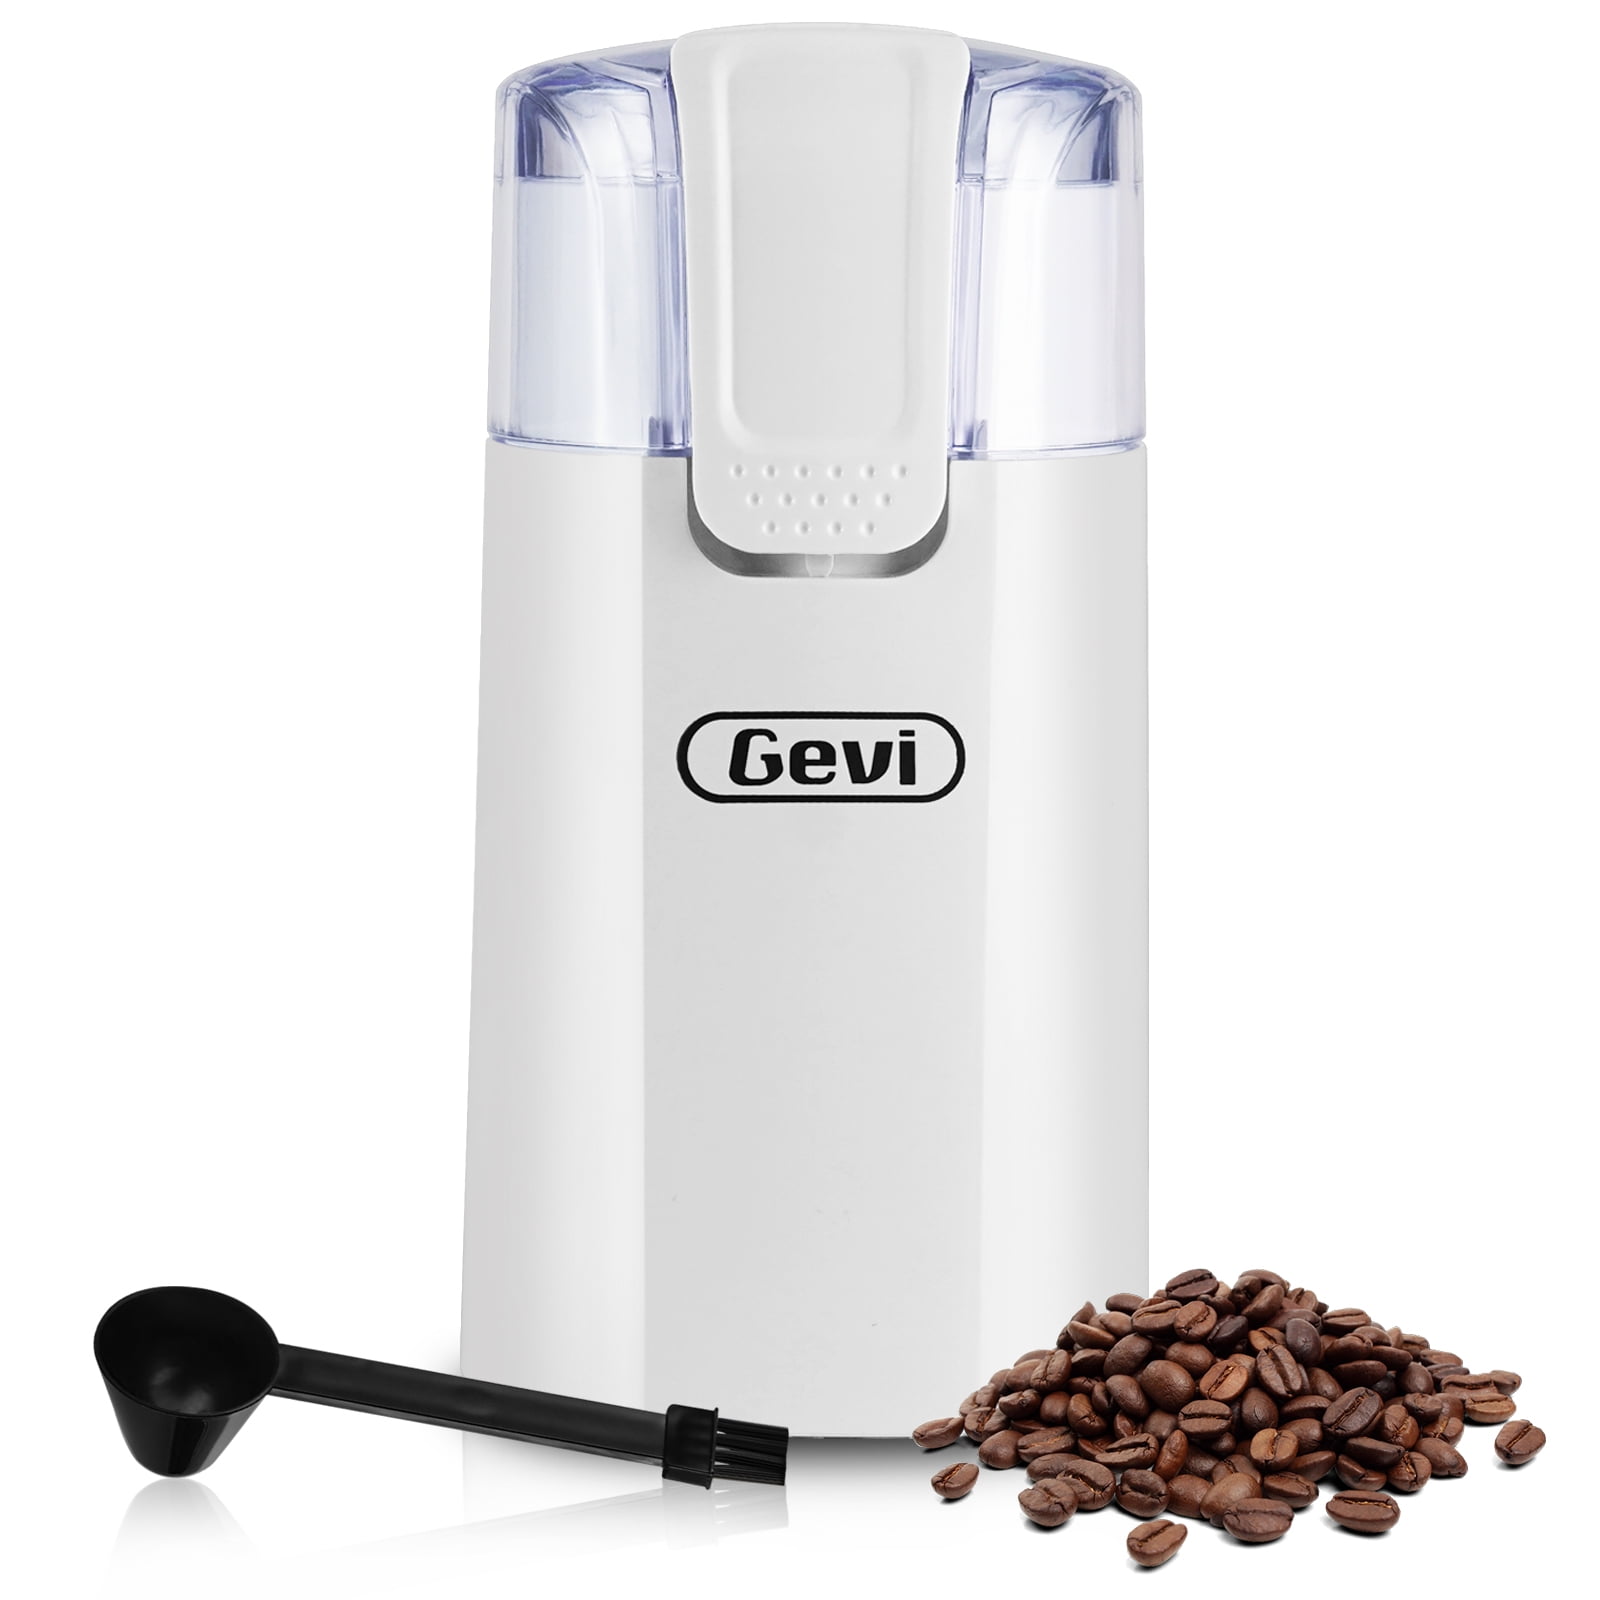 Better Chef 3.5 oz. White Blade Coffee Grinder 985102728M - The